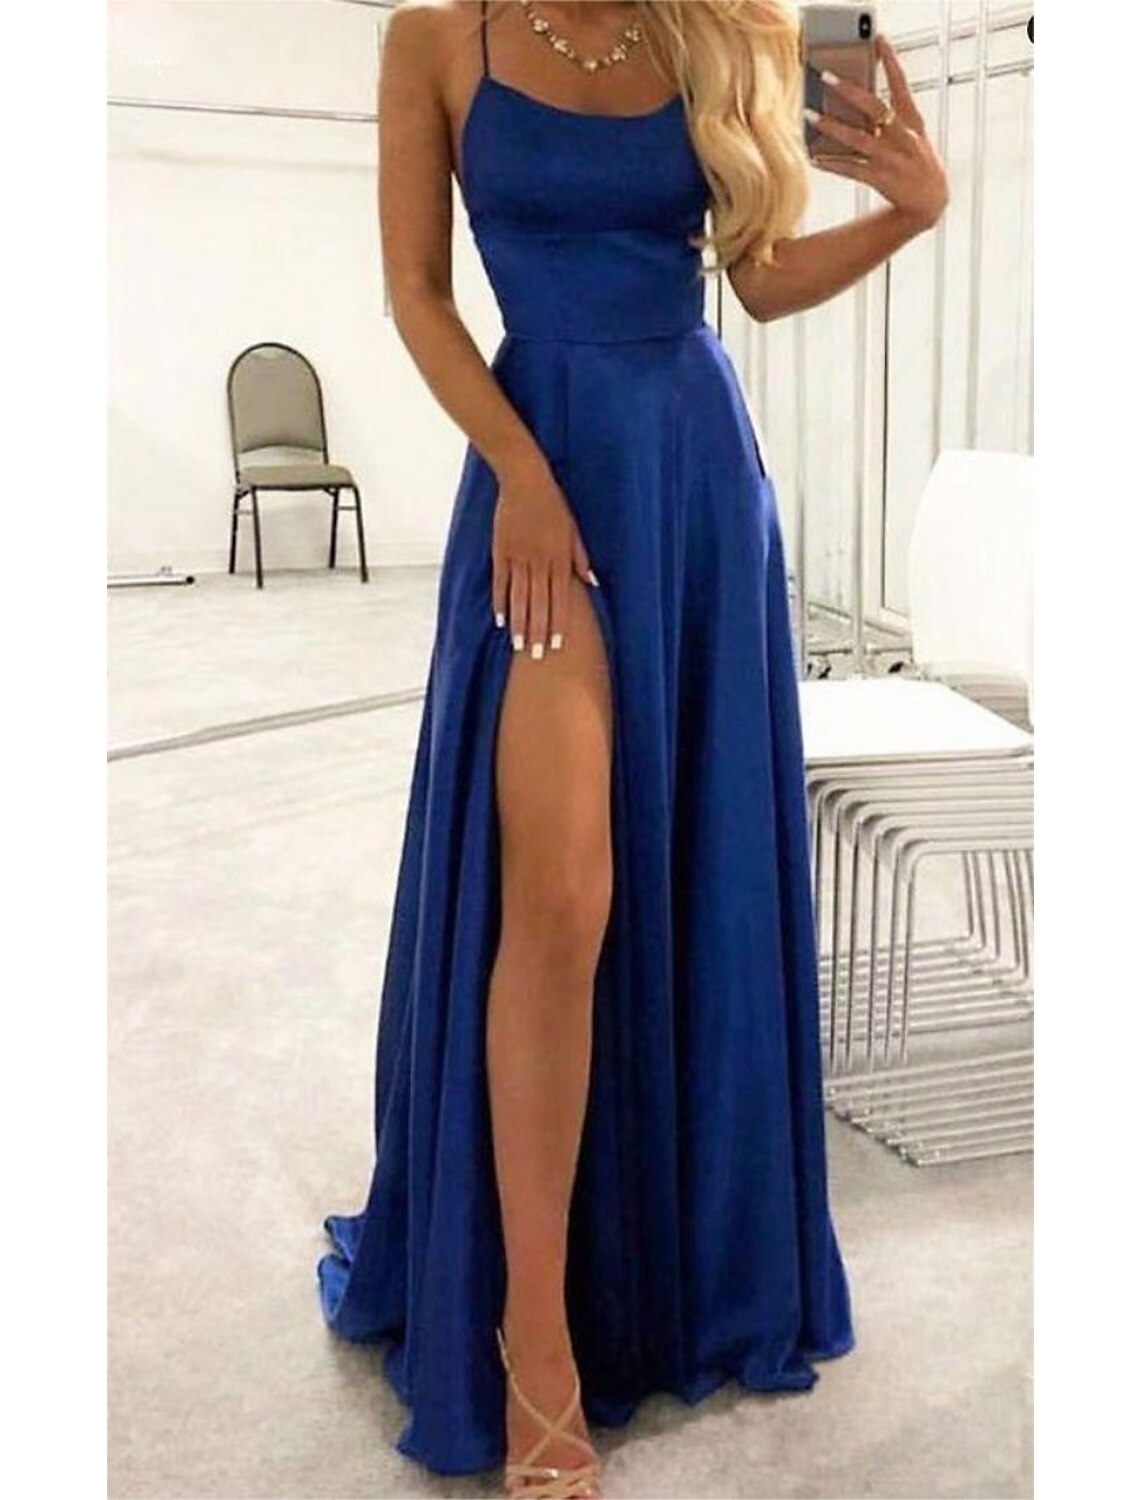 A-Line Evening Gown Empire Dress Formal Court Train Sleeveless Spaghetti Strap Charmeuse Backless with Slit